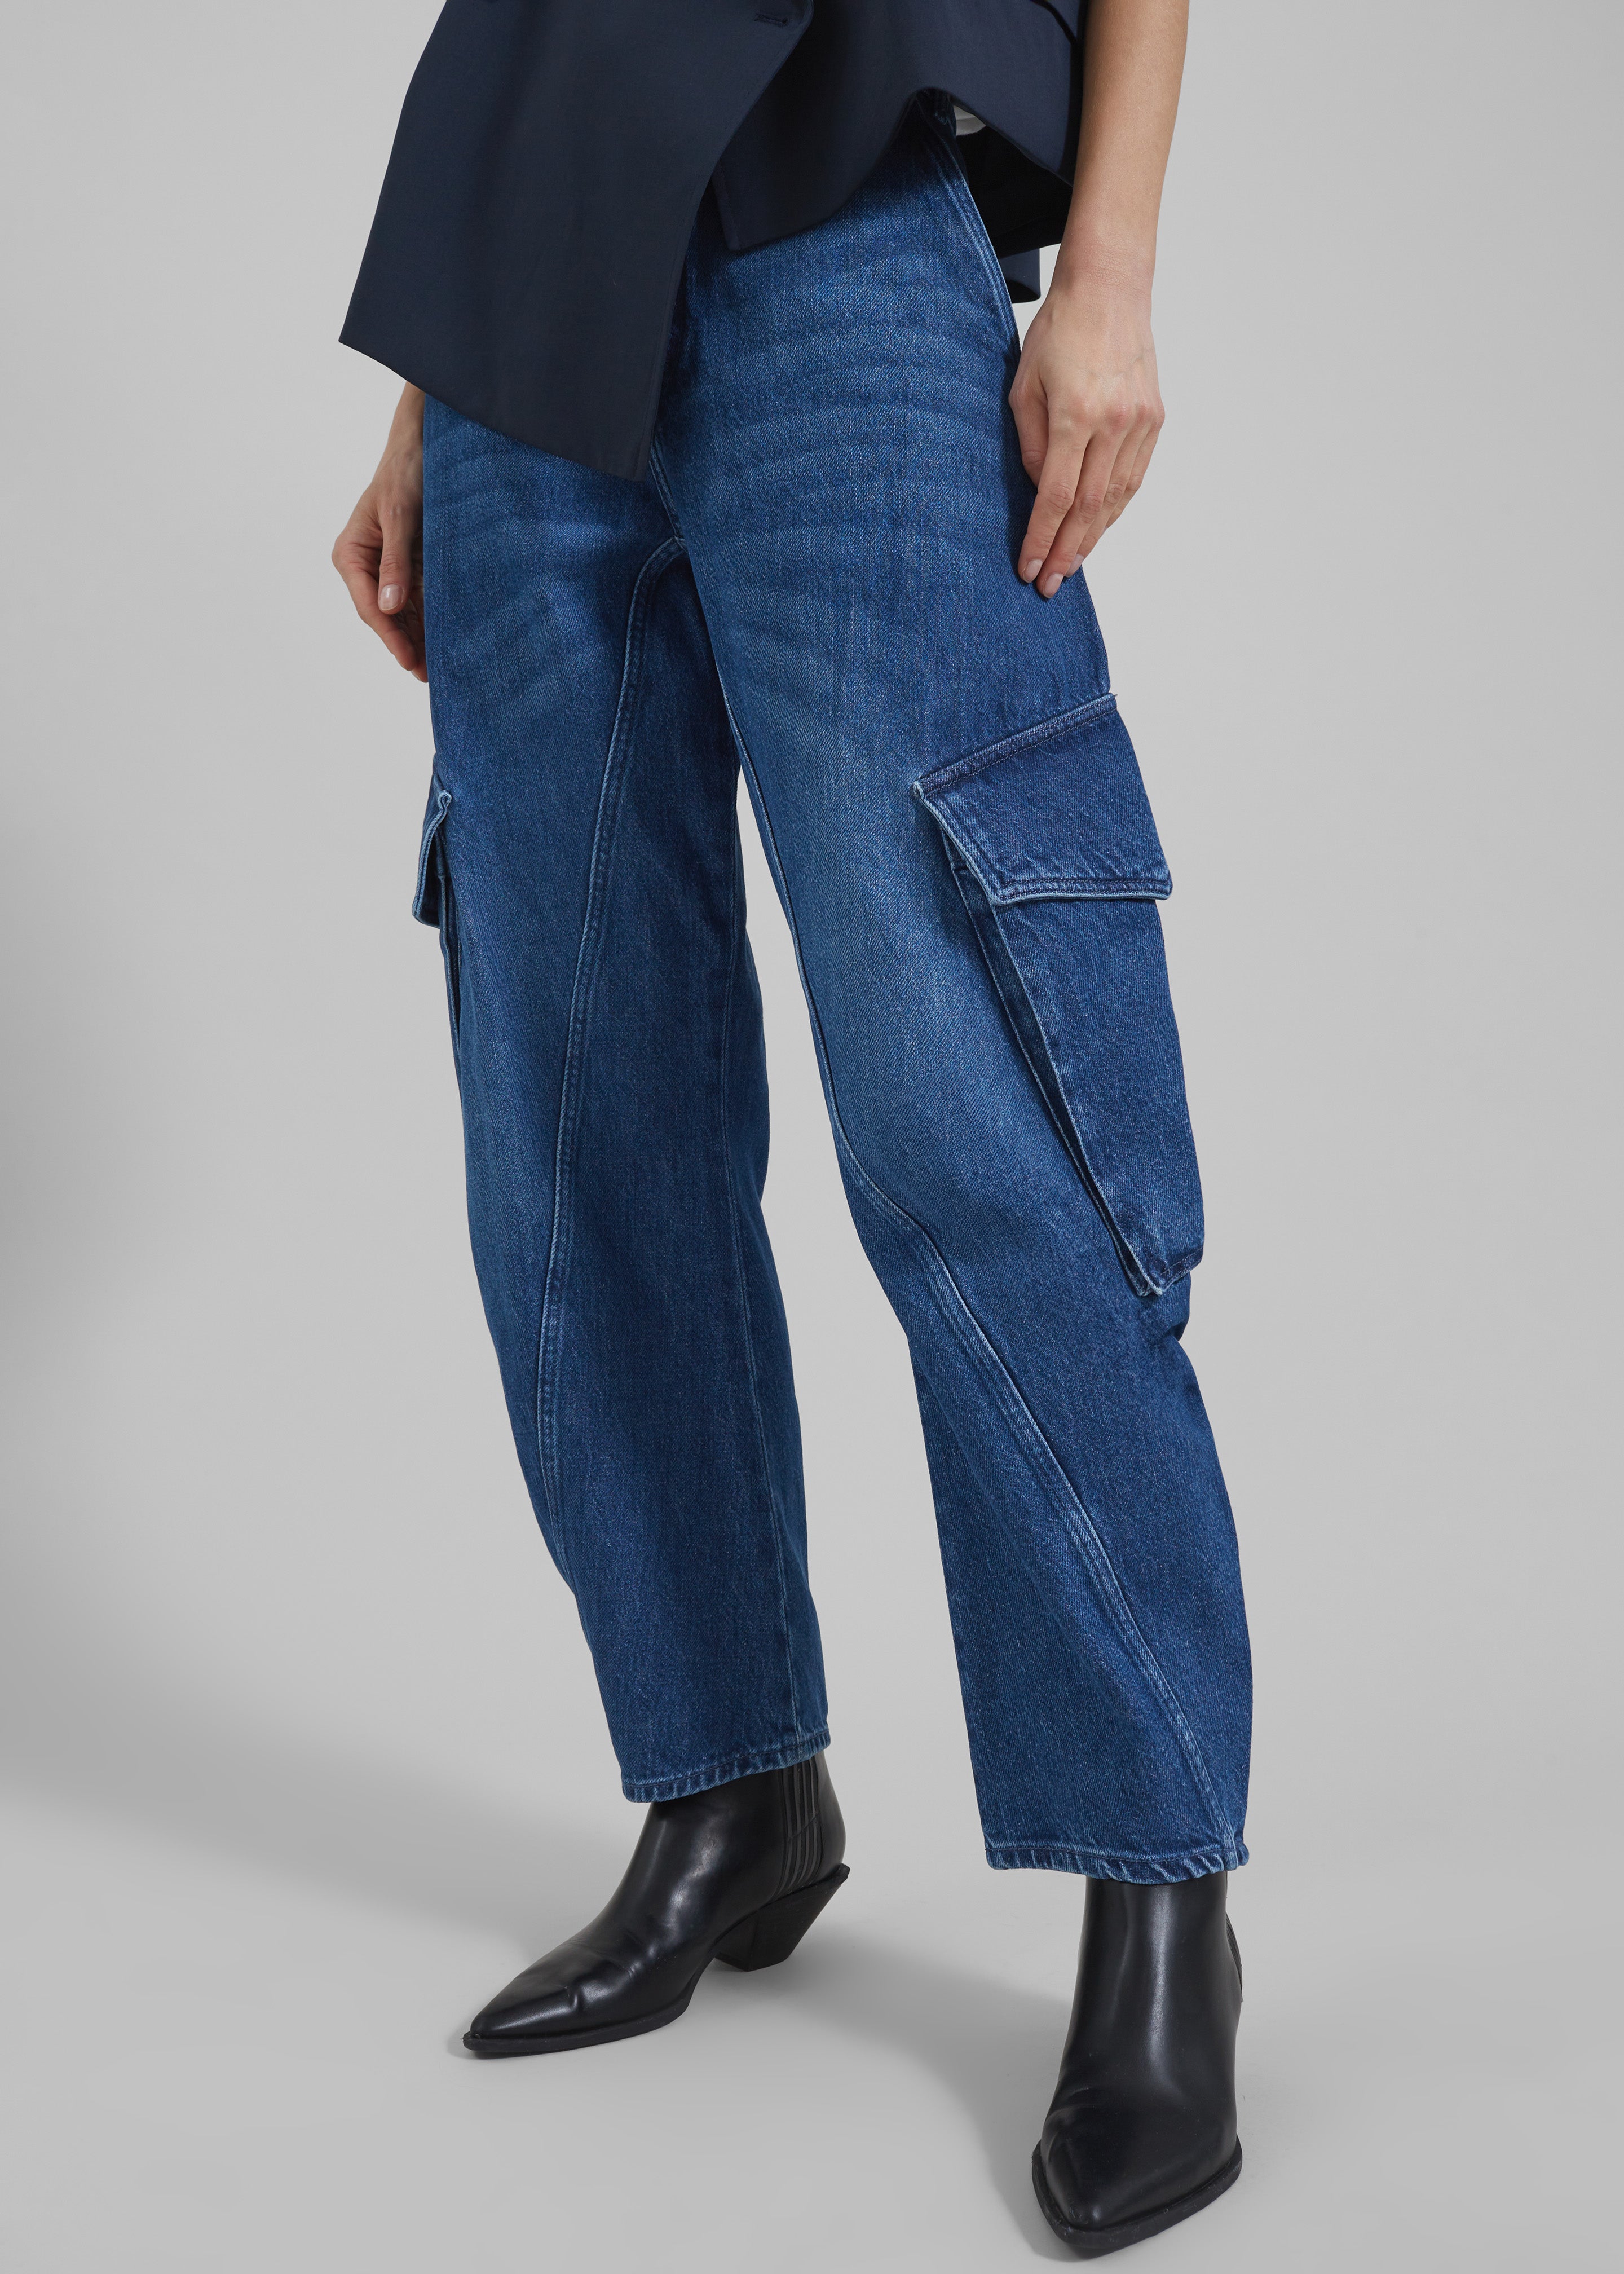 JW Anderson Twisted Cargo Jeans - Blue - 2